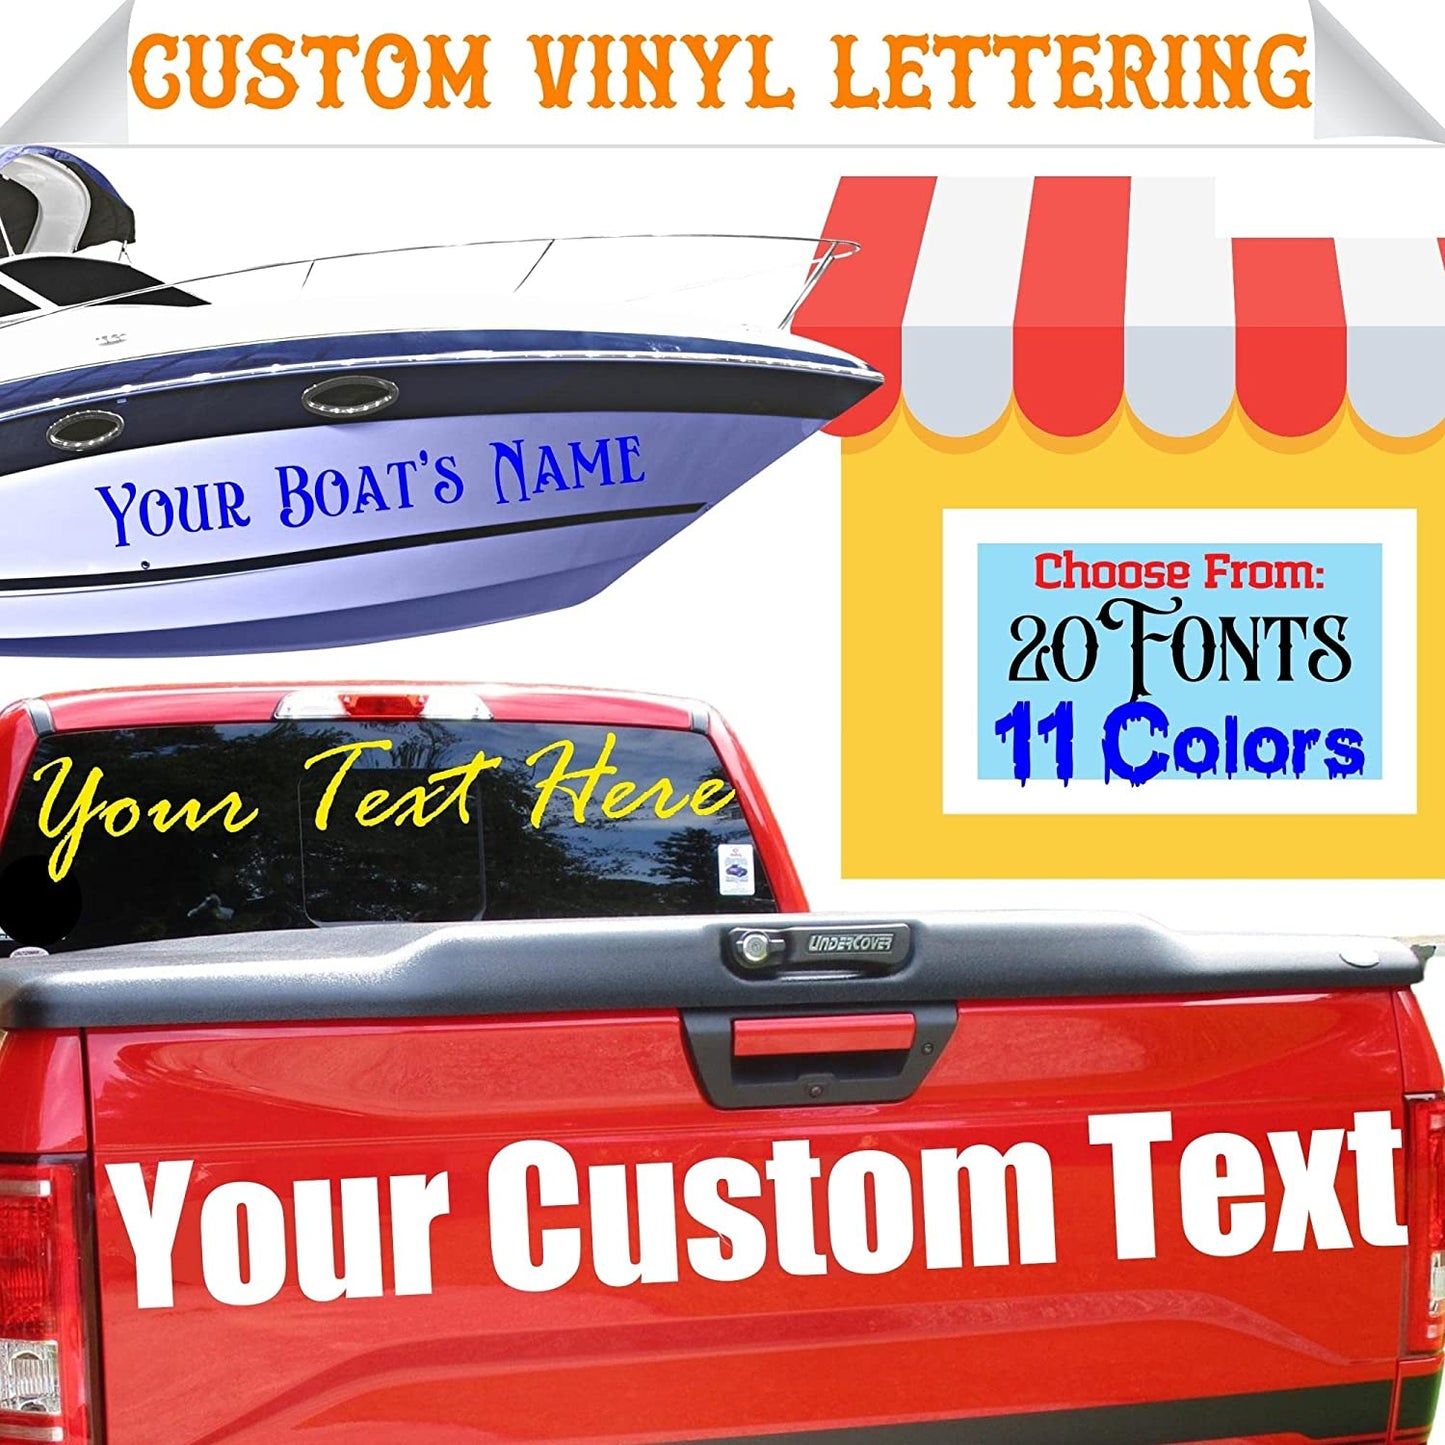 Custom Vinyl Lettering Decal | Make Your Own Car Sticker Decal Personalized Text - Waterproof and Easy to Apply on Semi, Truck, Car, Boat, Window, Windshield, Door, Business or Bumper | 30 Fonts & 11 Colors (6 inch High Lettering)